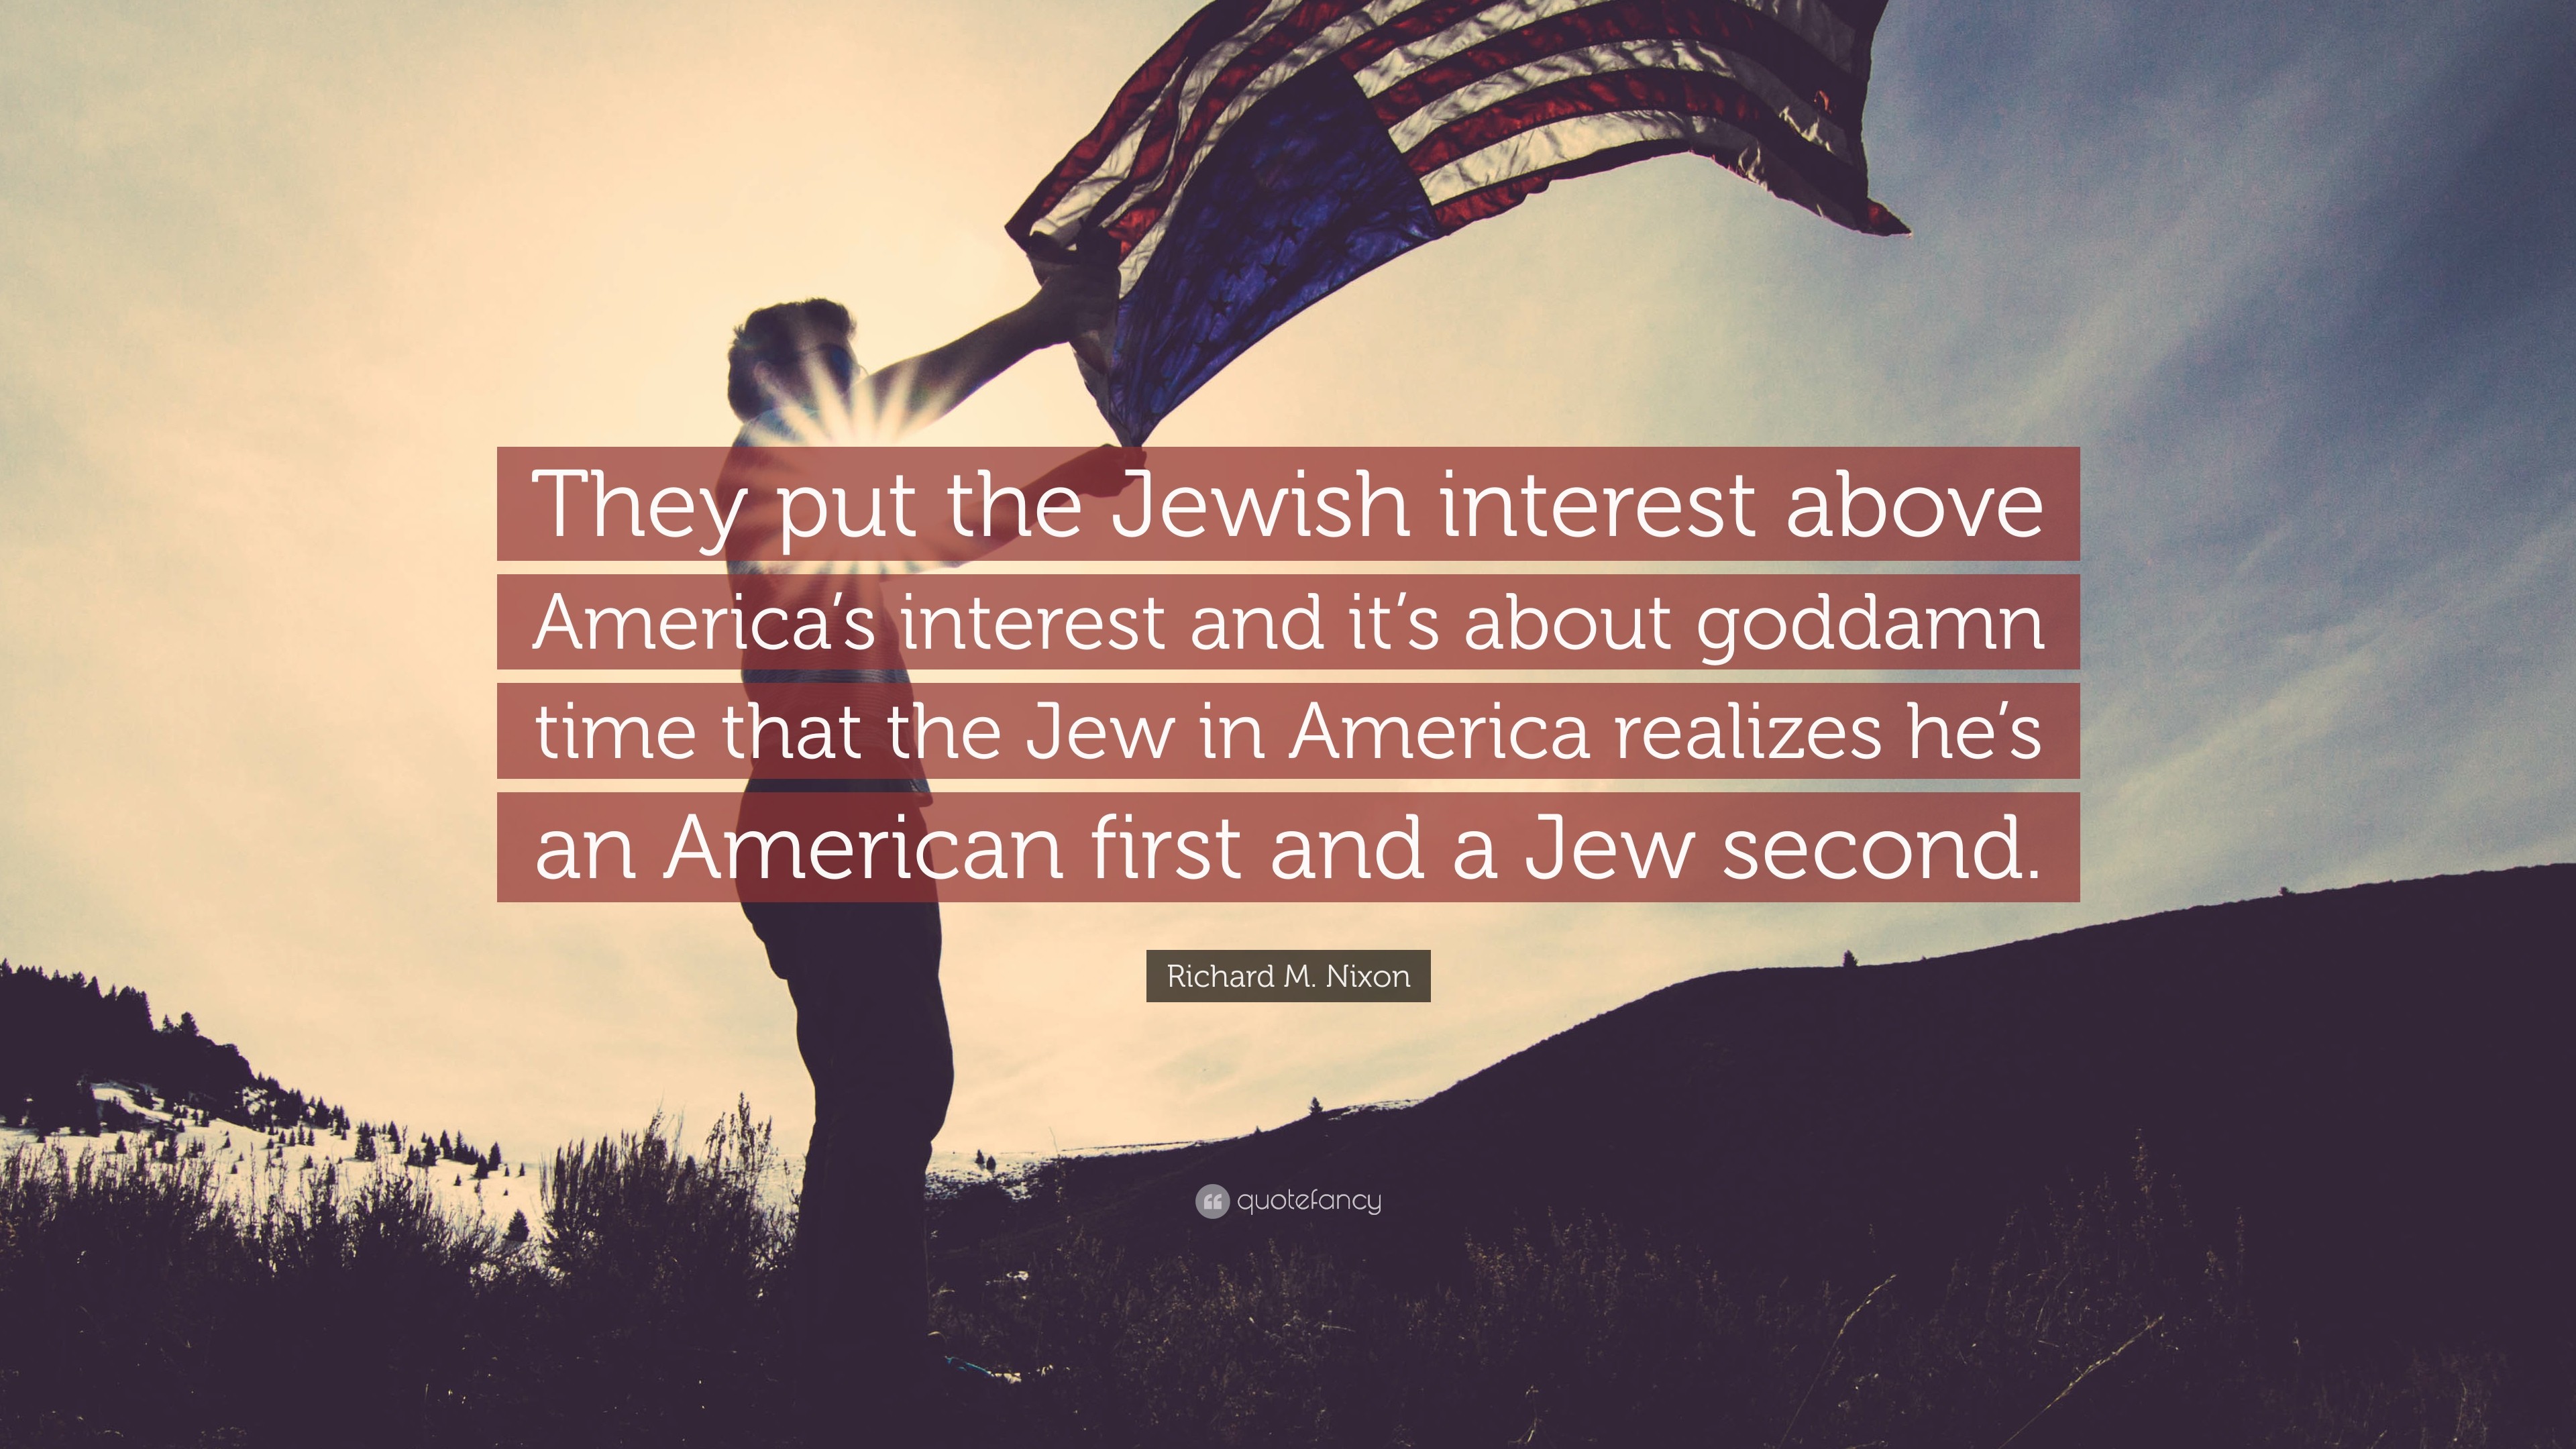 3840x2160 Richard M. Nixon Quote: “They put the Jewish interest above America's  interest and